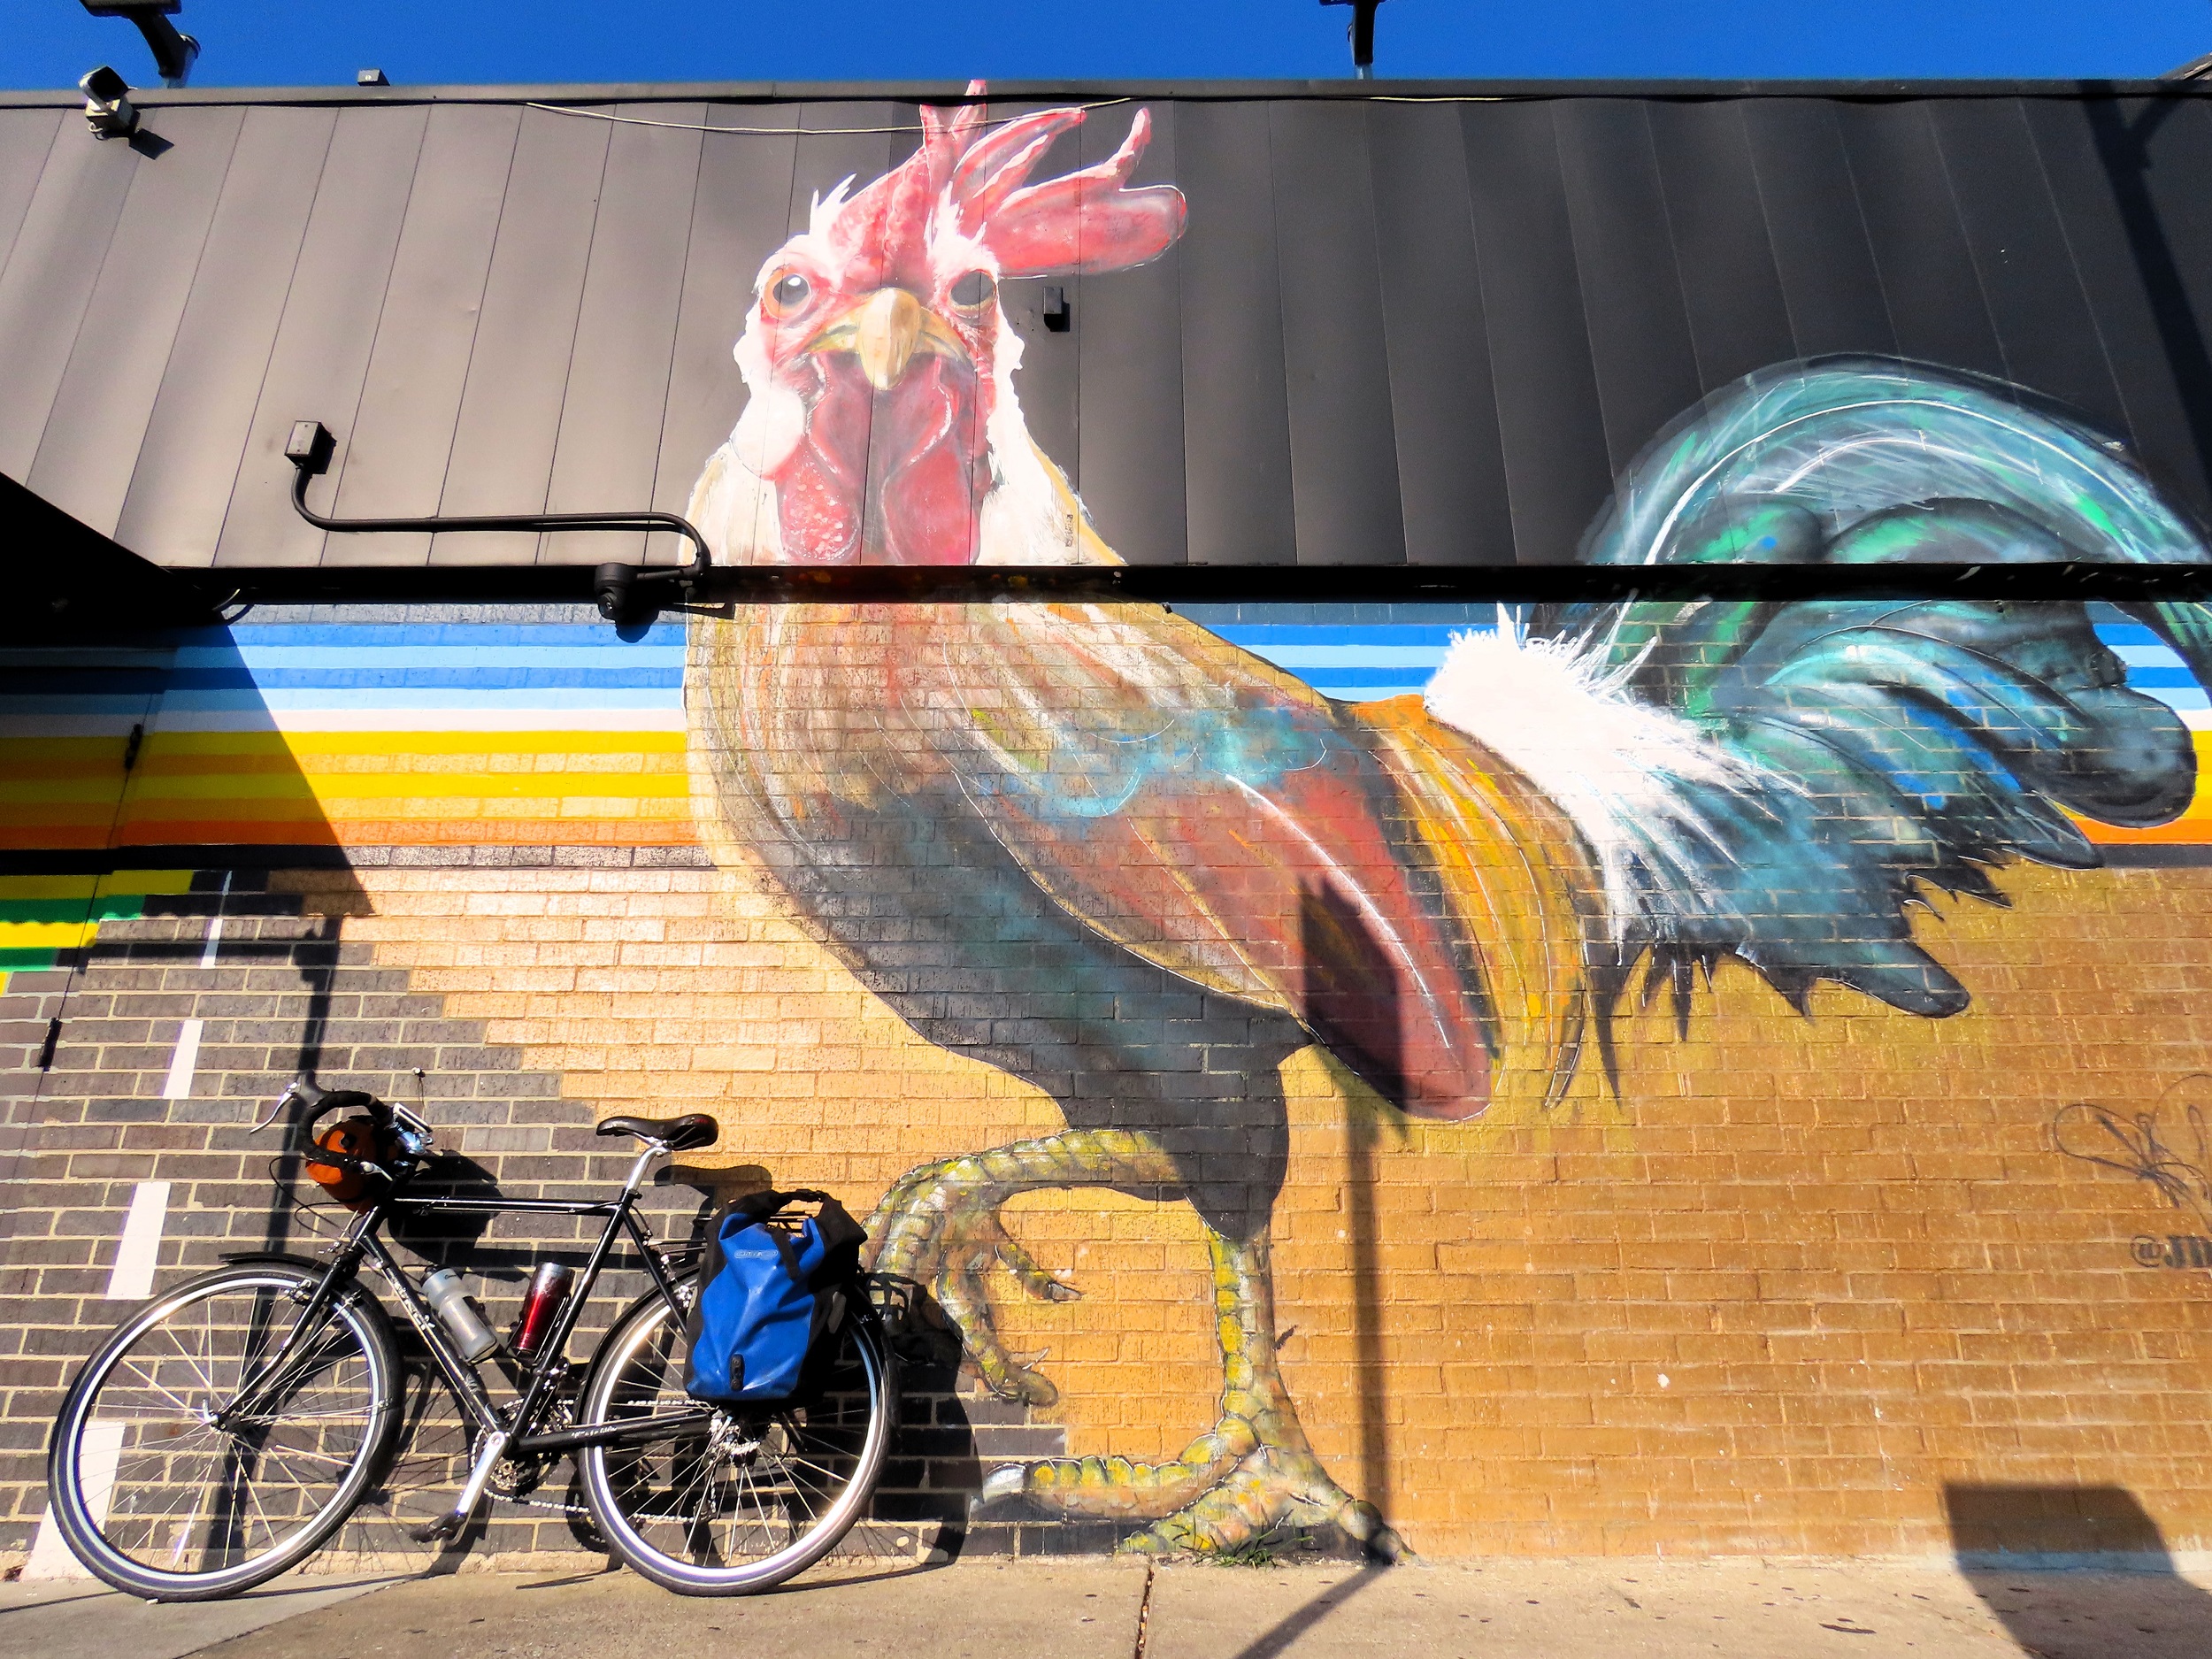 A tour bike leaning on a wall with a large chicken mural looking directly at the camera.